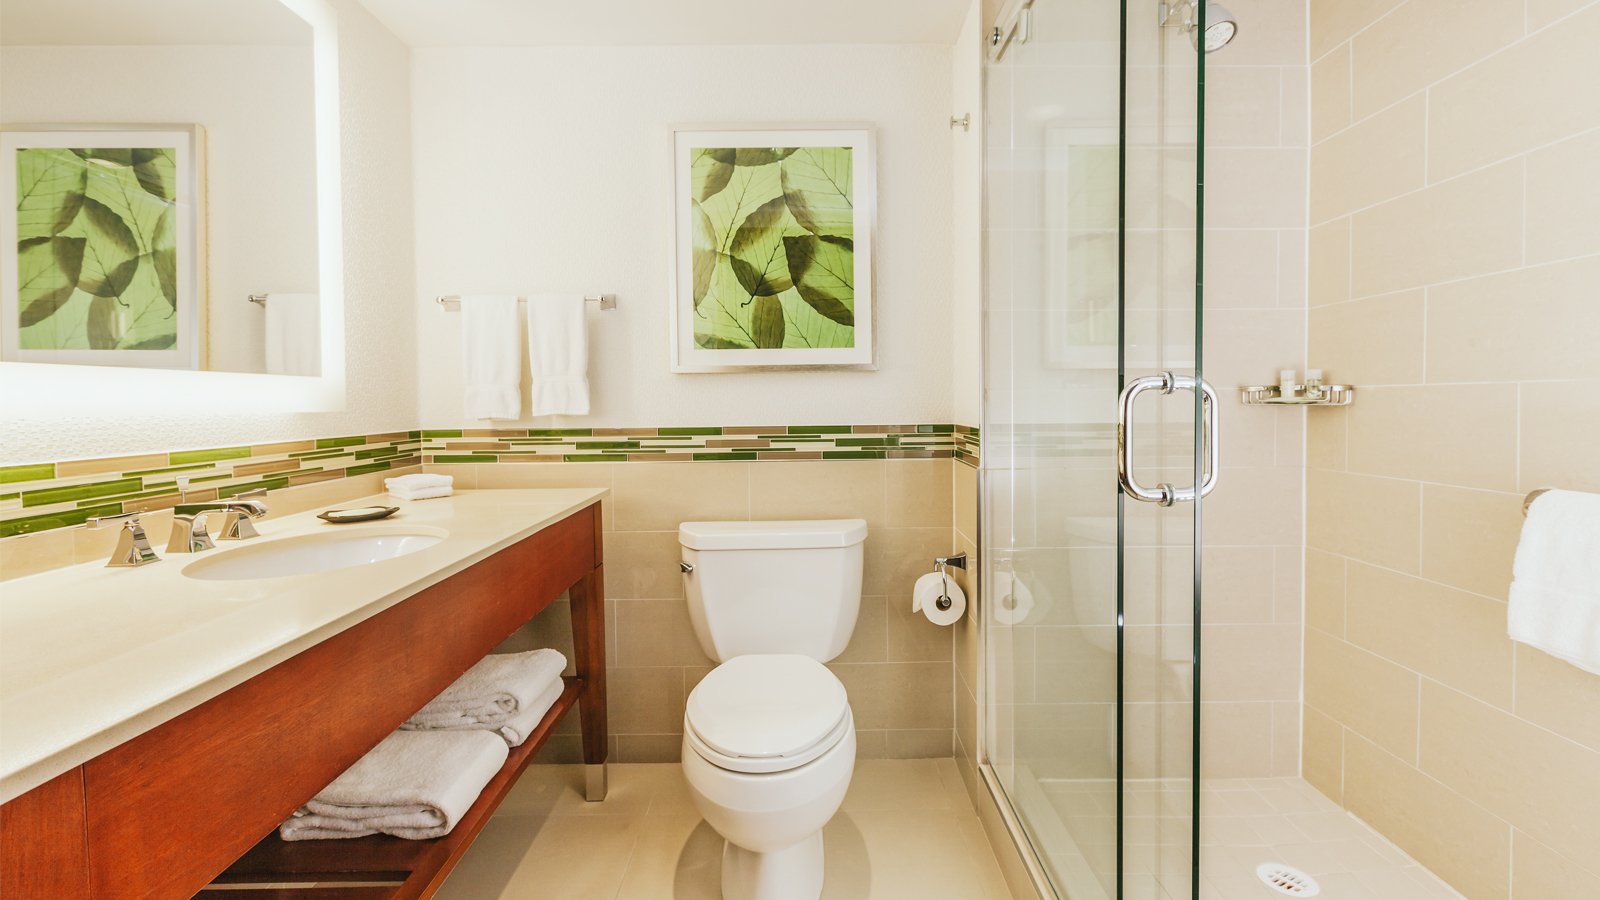 Air-assist toilets in the rooms cut down on water costs. Photo from Westin Hotels